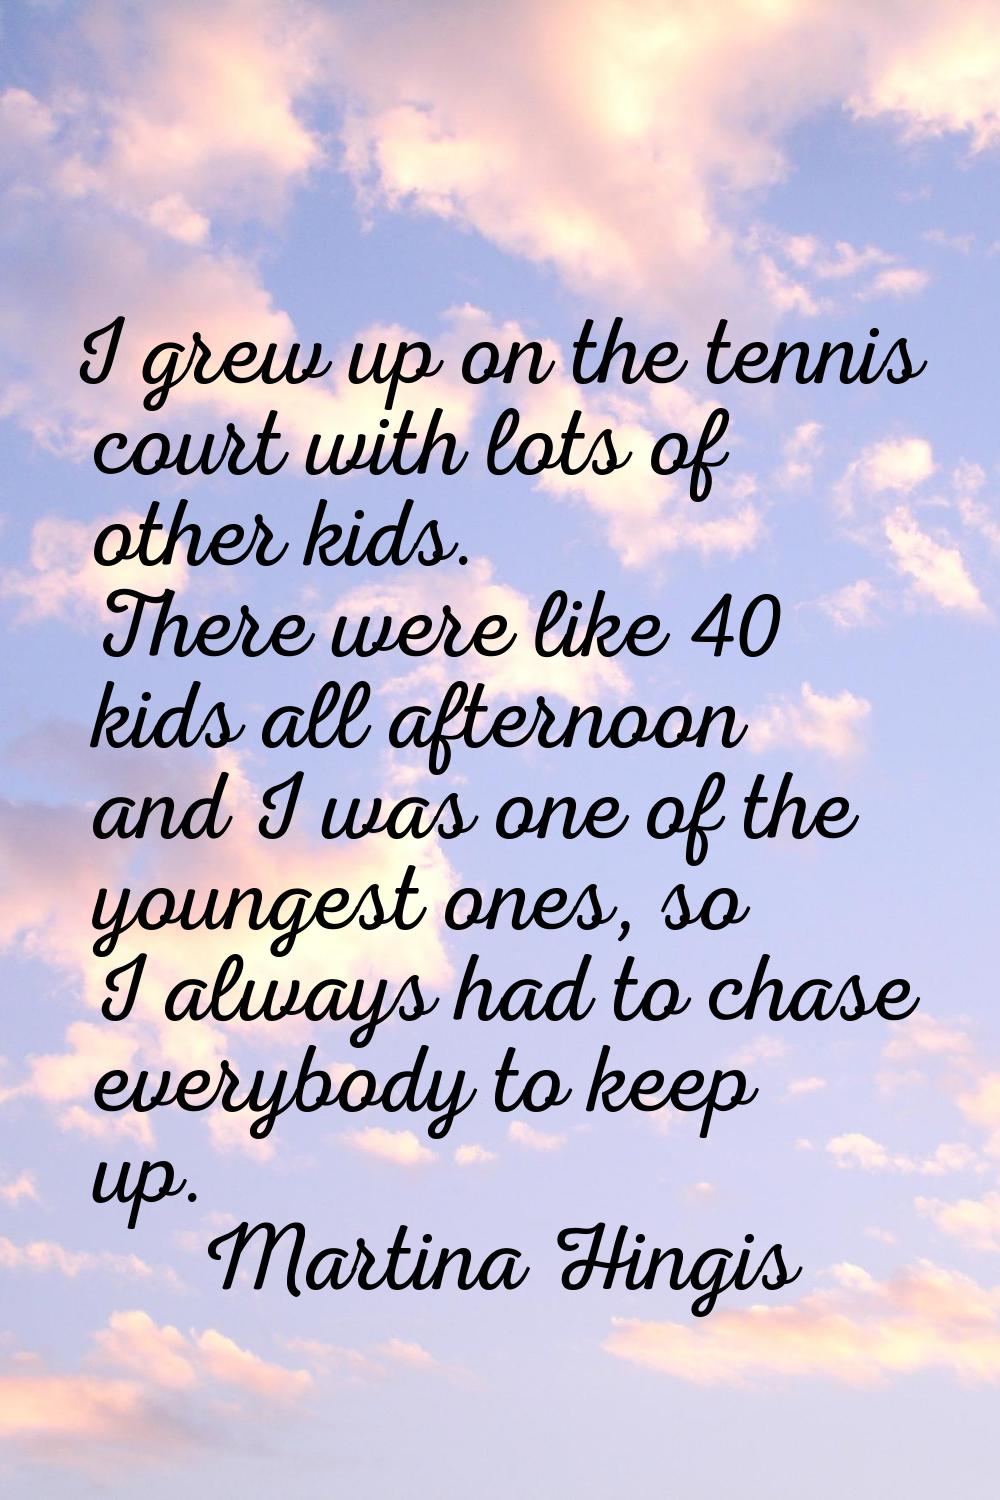 I grew up on the tennis court with lots of other kids. There were like 40 kids all afternoon and I 